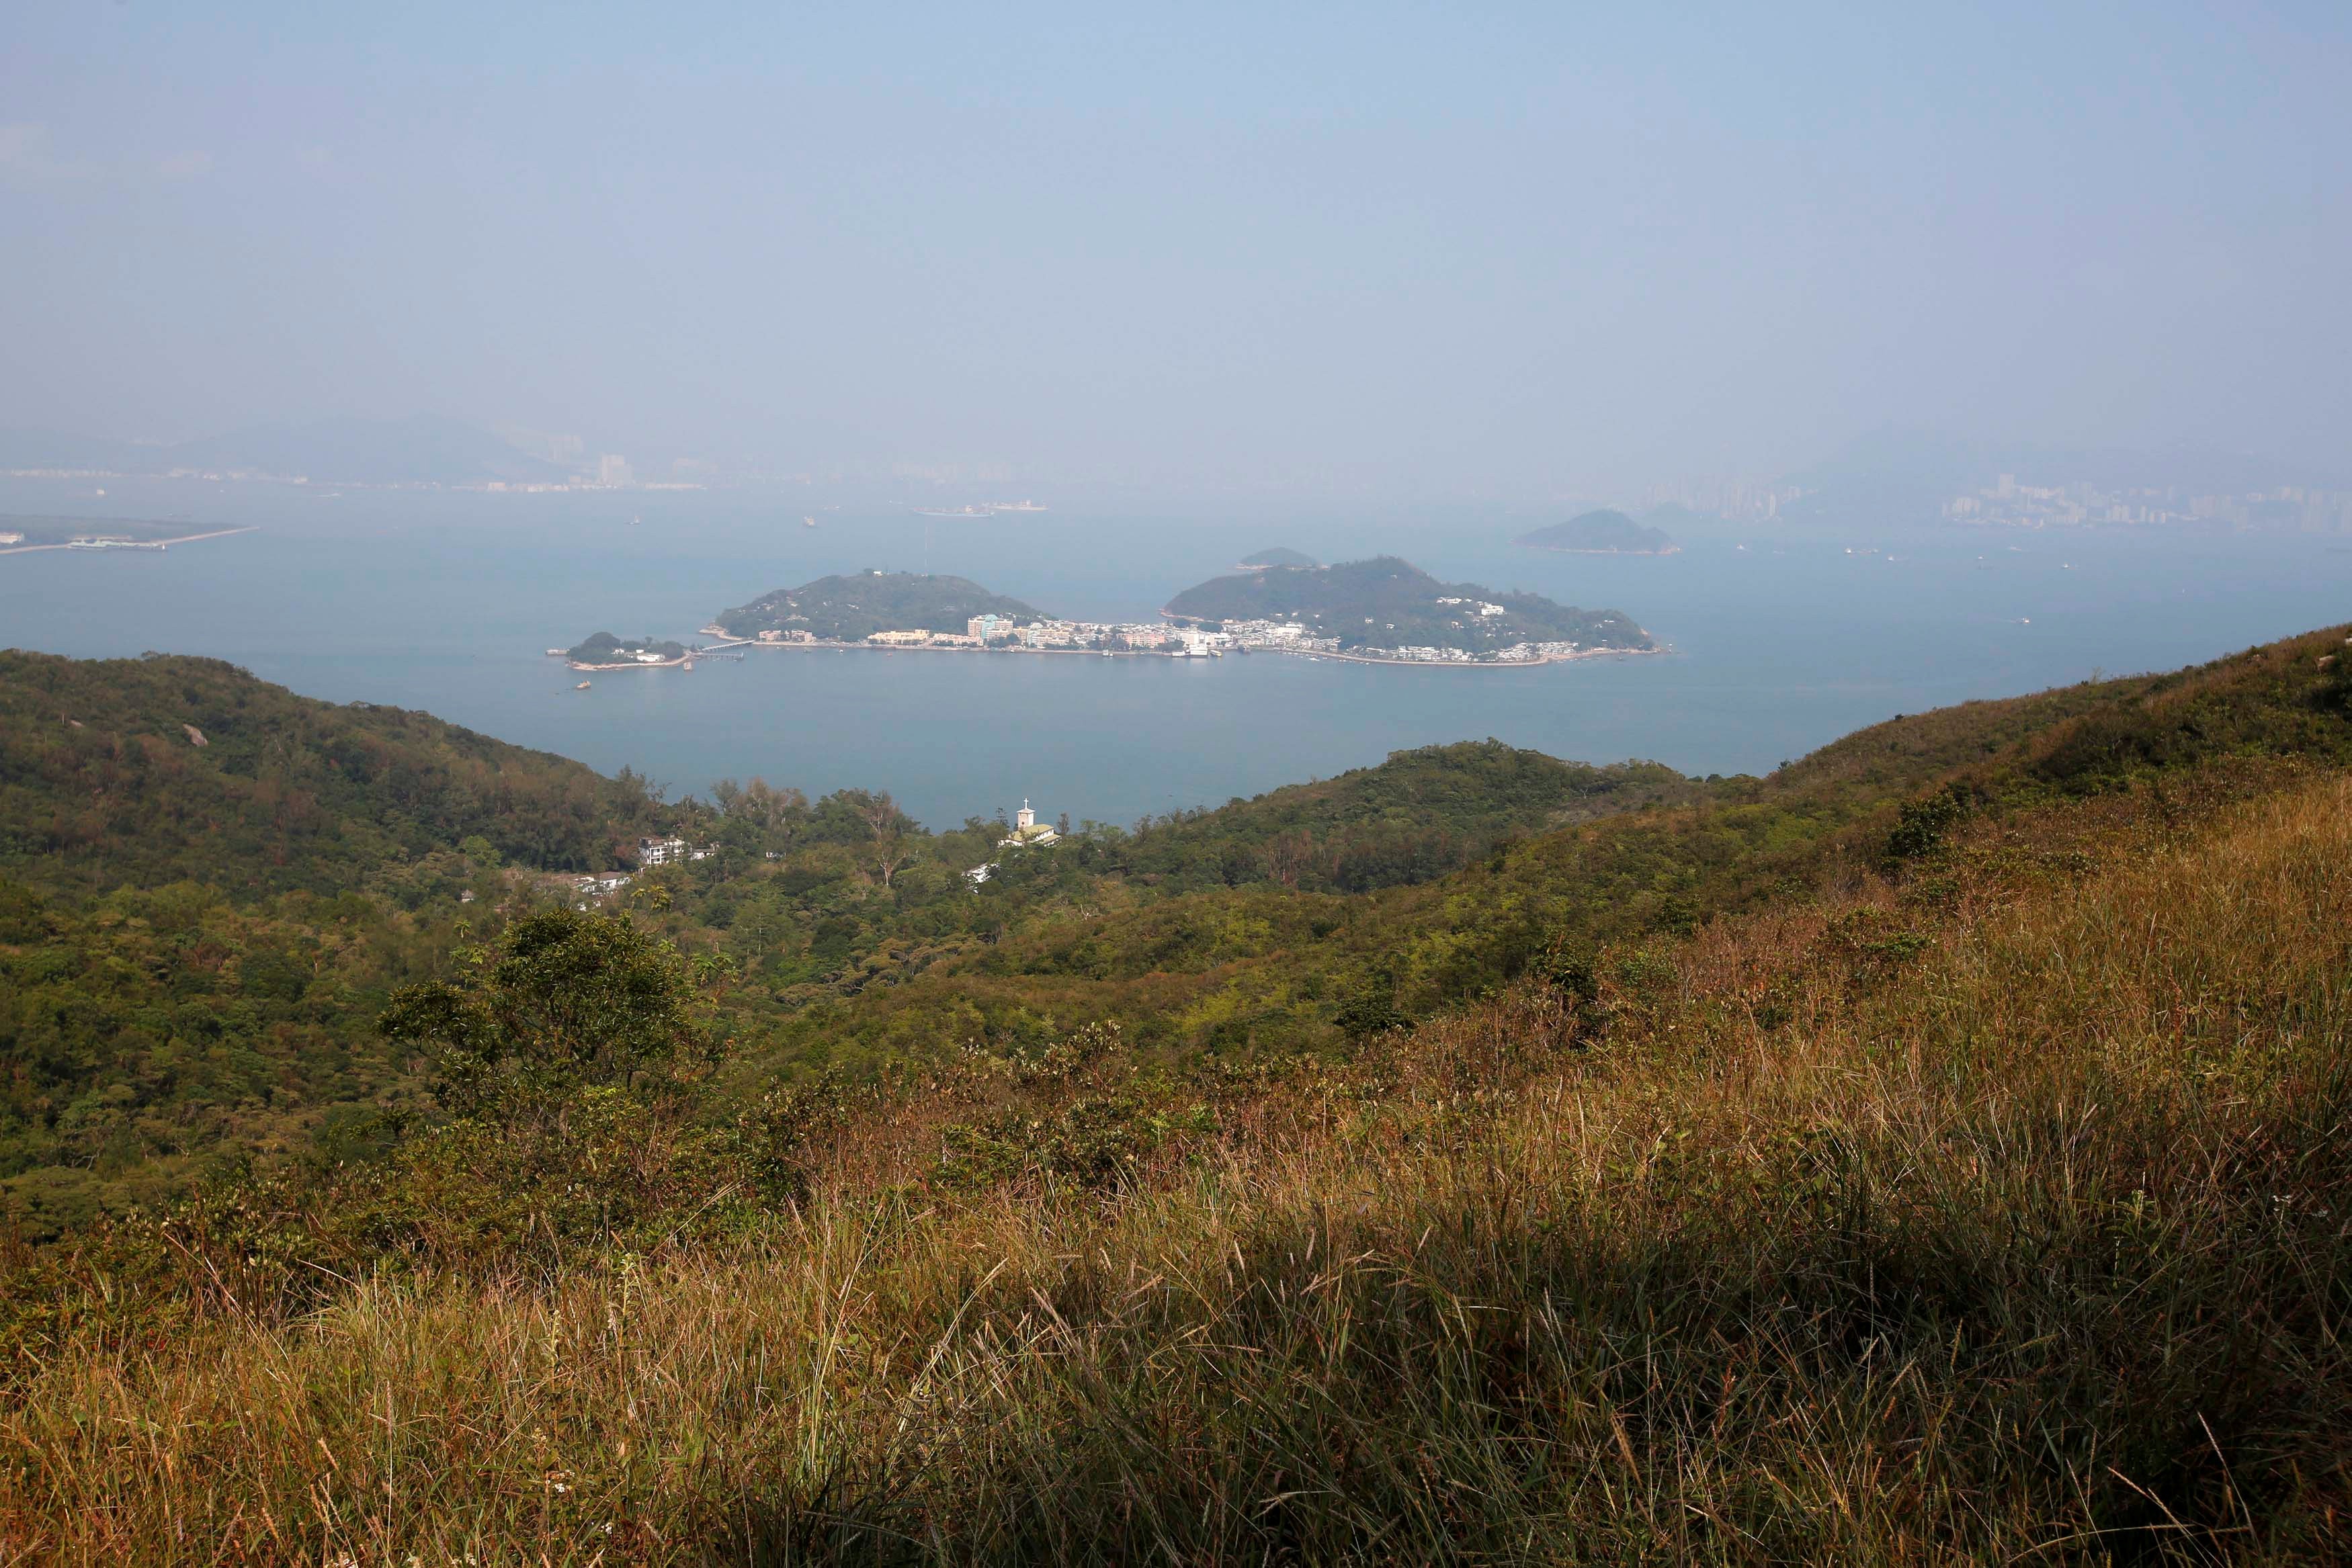 Under Carrie Lam’s proposal, a metropolis will be built to the east of Lantau. Photo: Reuters